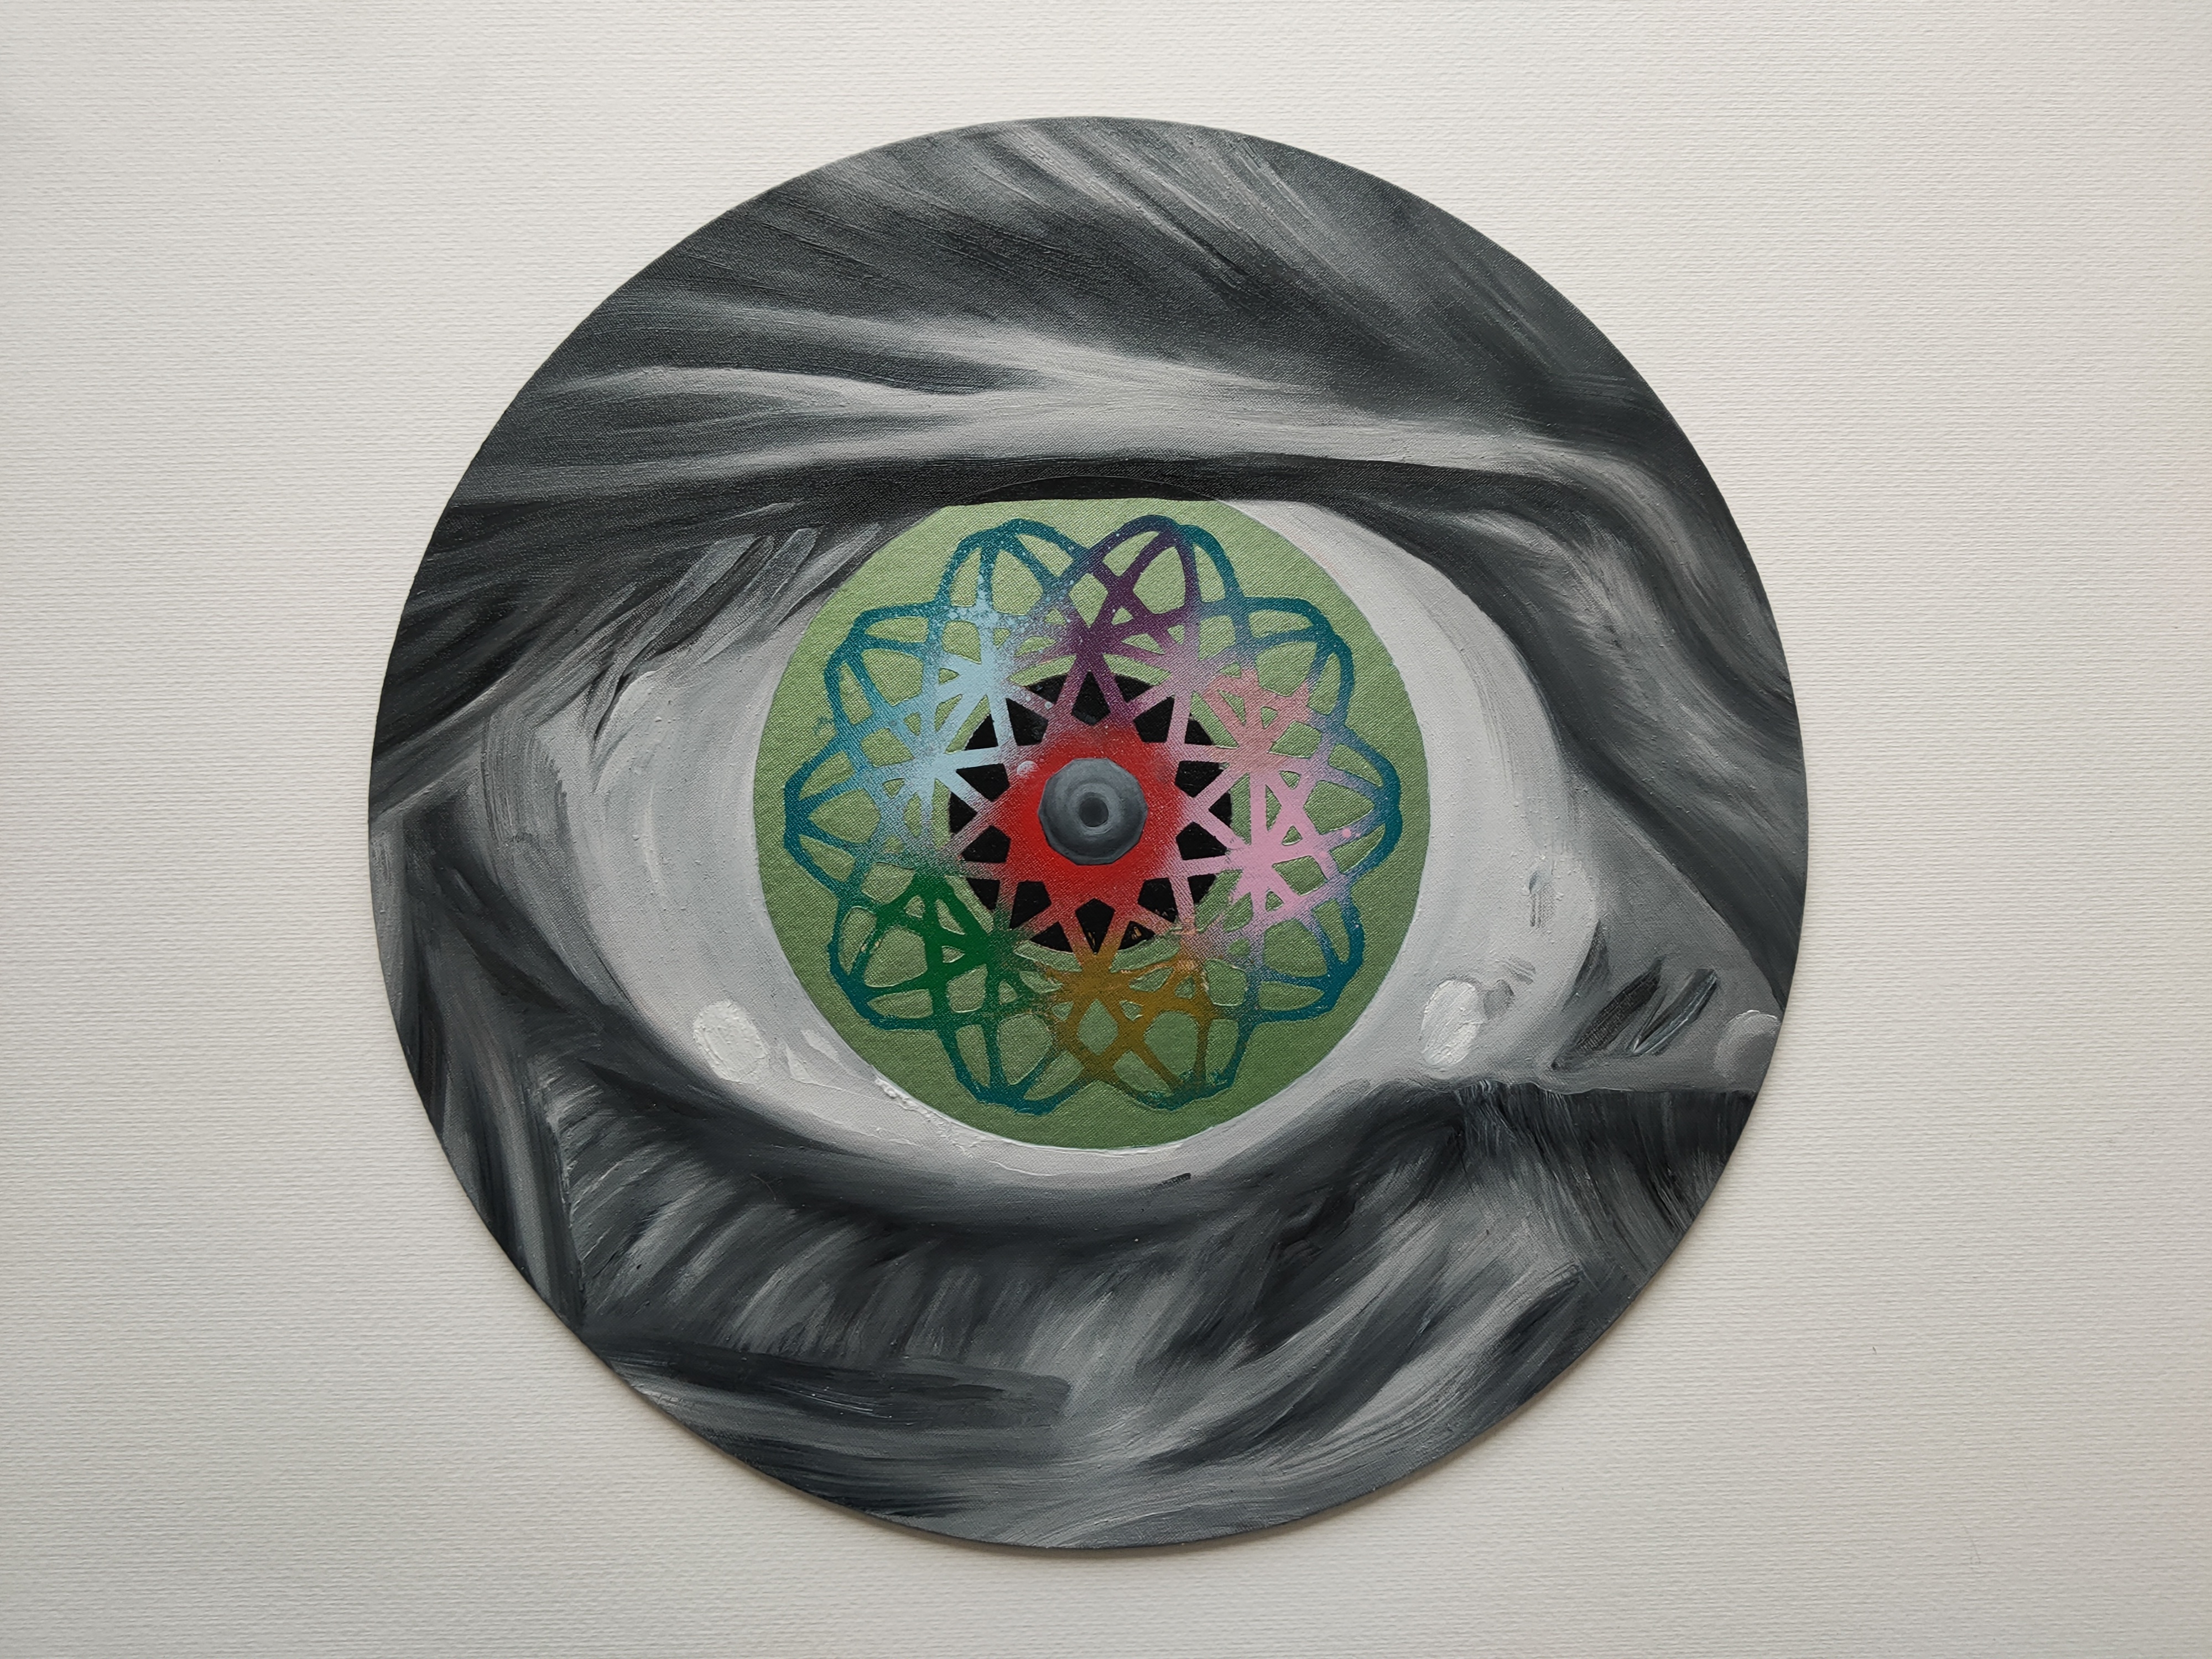 Iris of Why, Marc Molk, 2020, oil and acrylic on canvas board, diameter 15,7 in